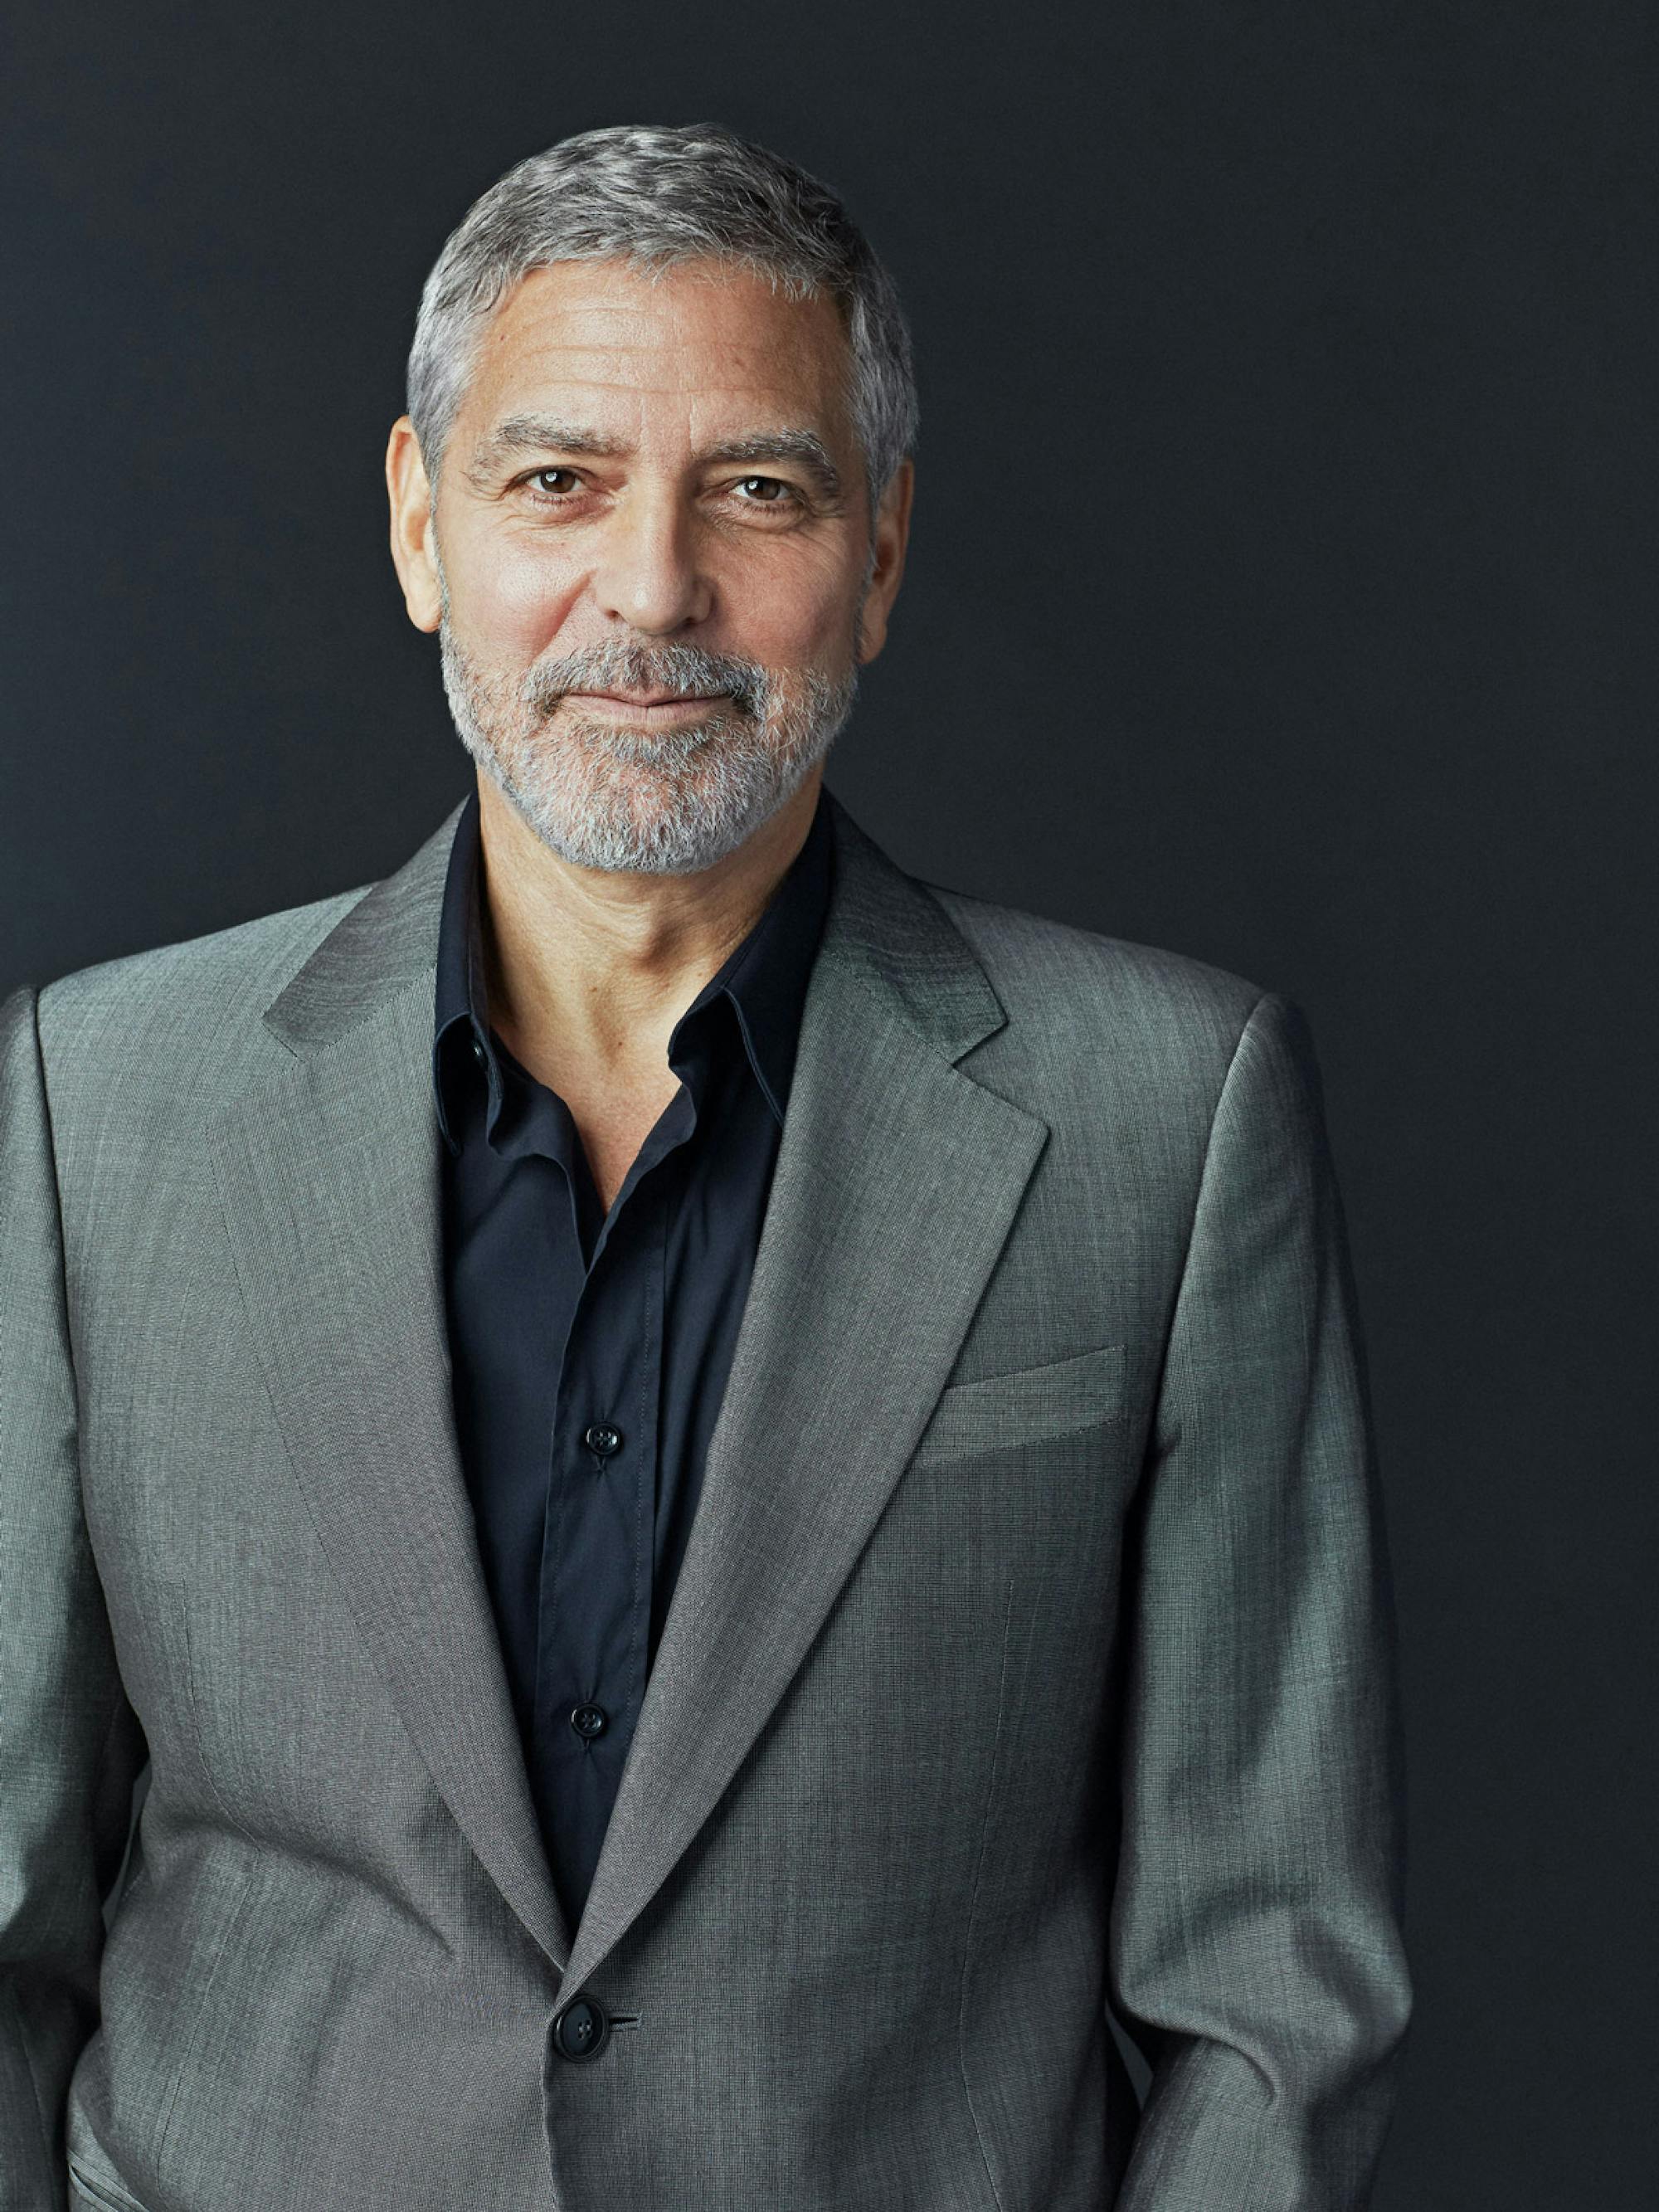 George Clooney in a gray suit against a black background. He gives you a subtle smile.